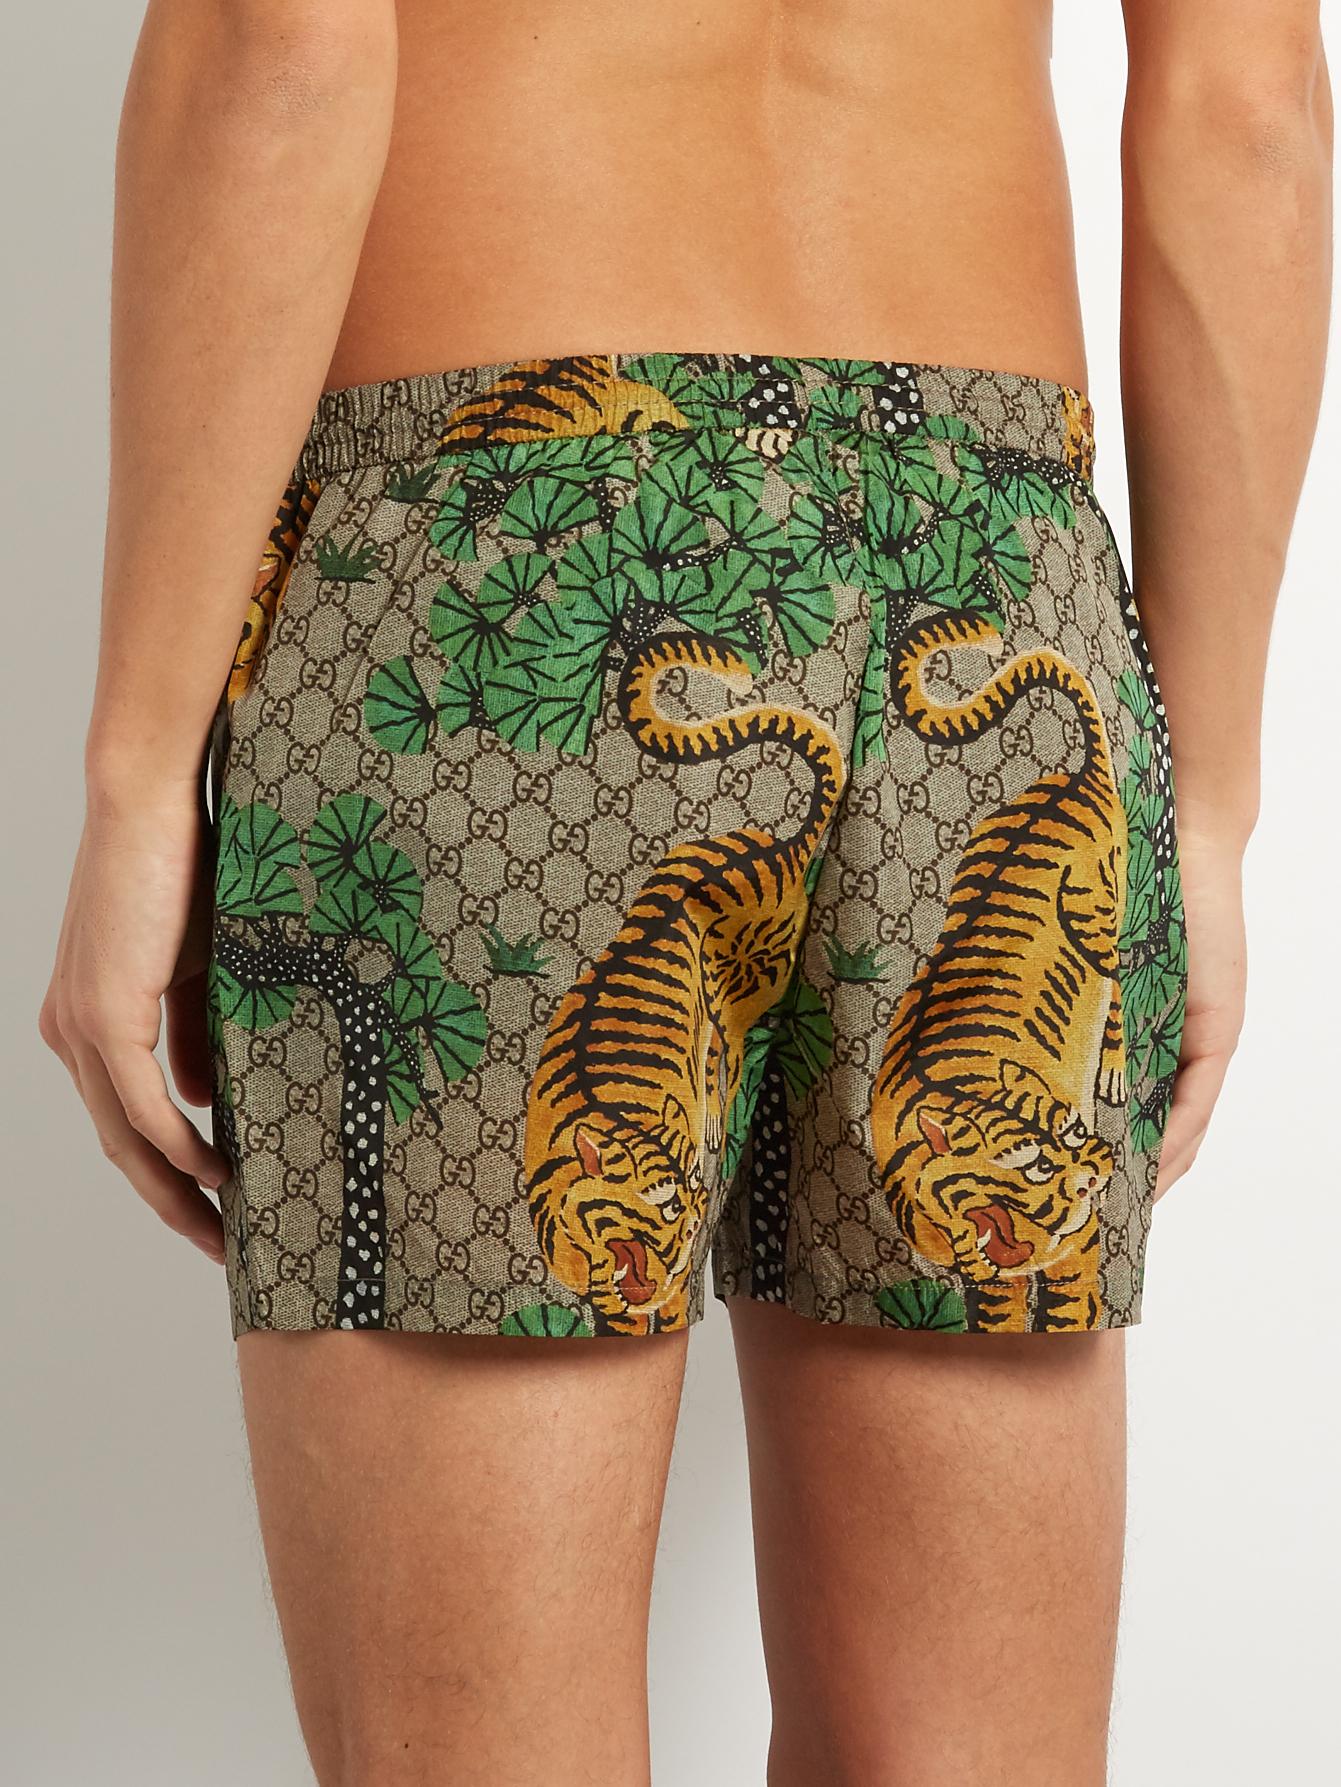 Lyst - Gucci Bengal-print Swim Shorts in Green for Men